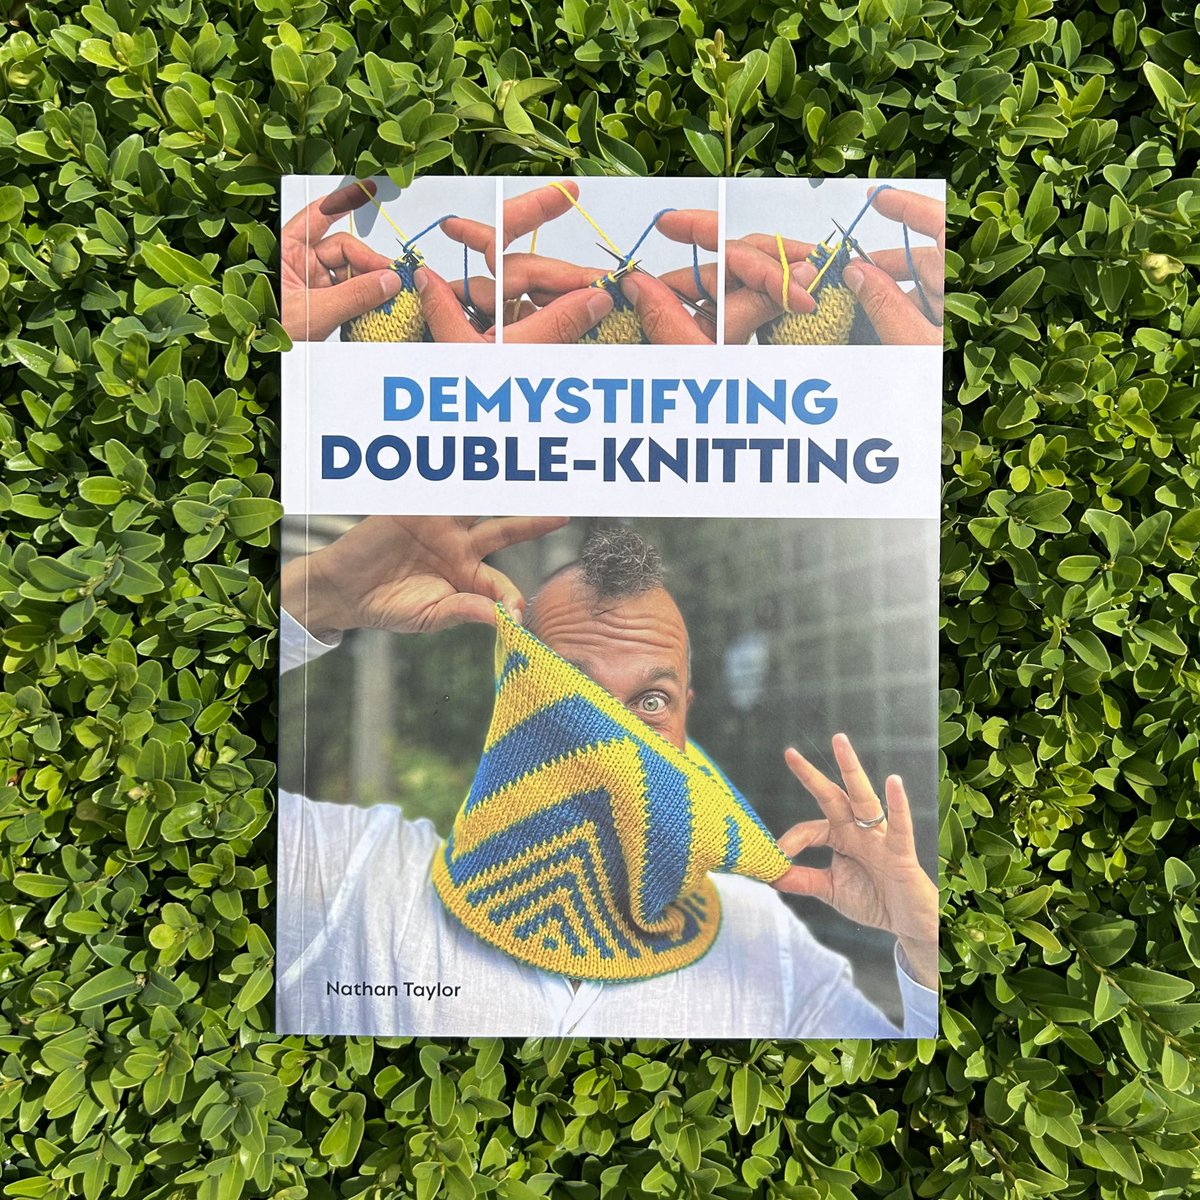 Introducing Demystifying Double-Knitting by Nathan Taylor. 🧵

Master the art of double knitting to produce reversible, double-layered, multi-coloured knits. 

Congratulations Nathan! 😆

#crowood #thecrowoodpress #knitting #doubleknitting